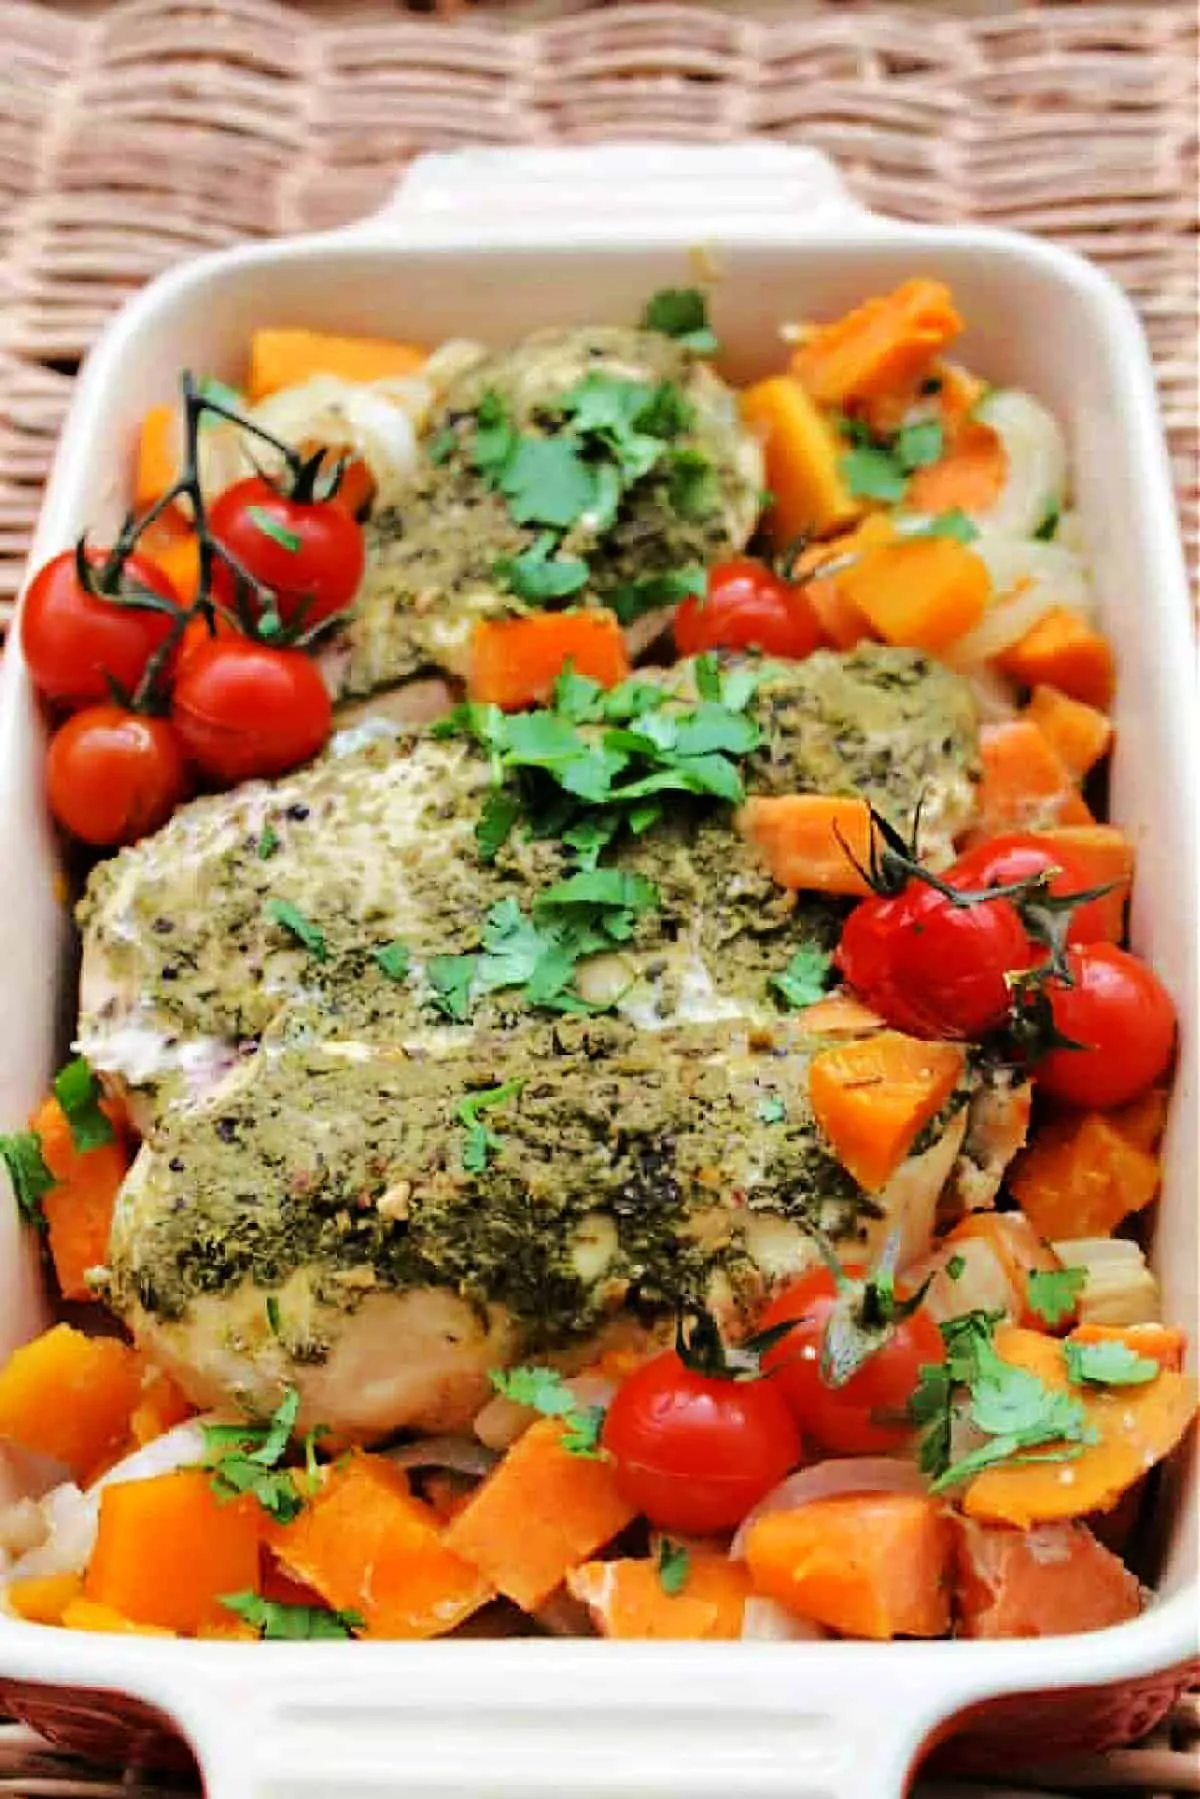 Serving dish of chicken with pesto and vegetables.